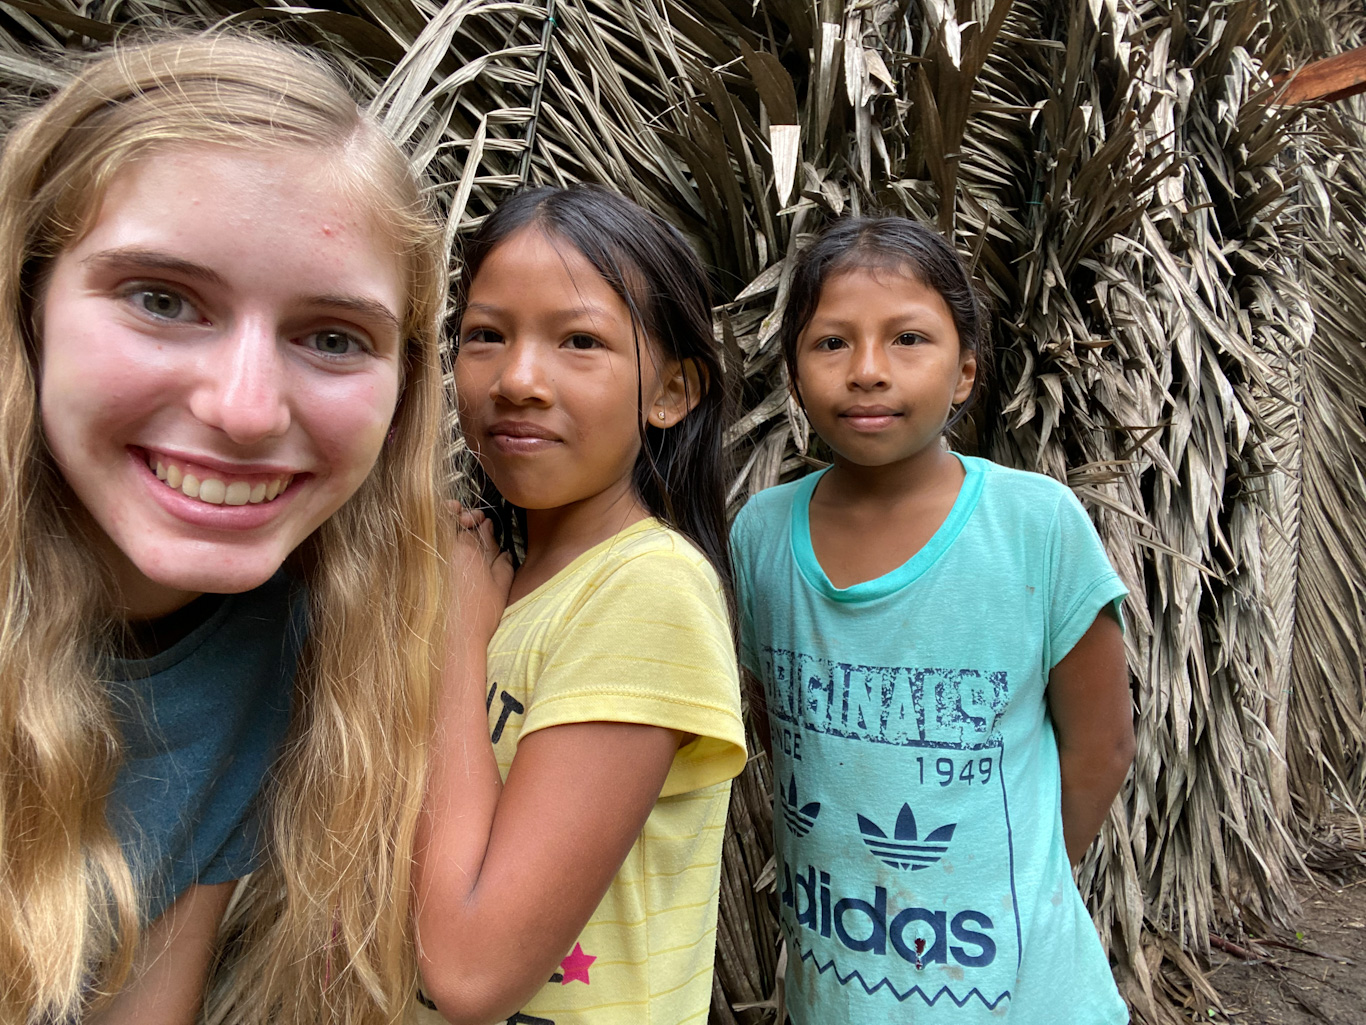 . Sarah-Kate Drown spends time with young children in Ecuador